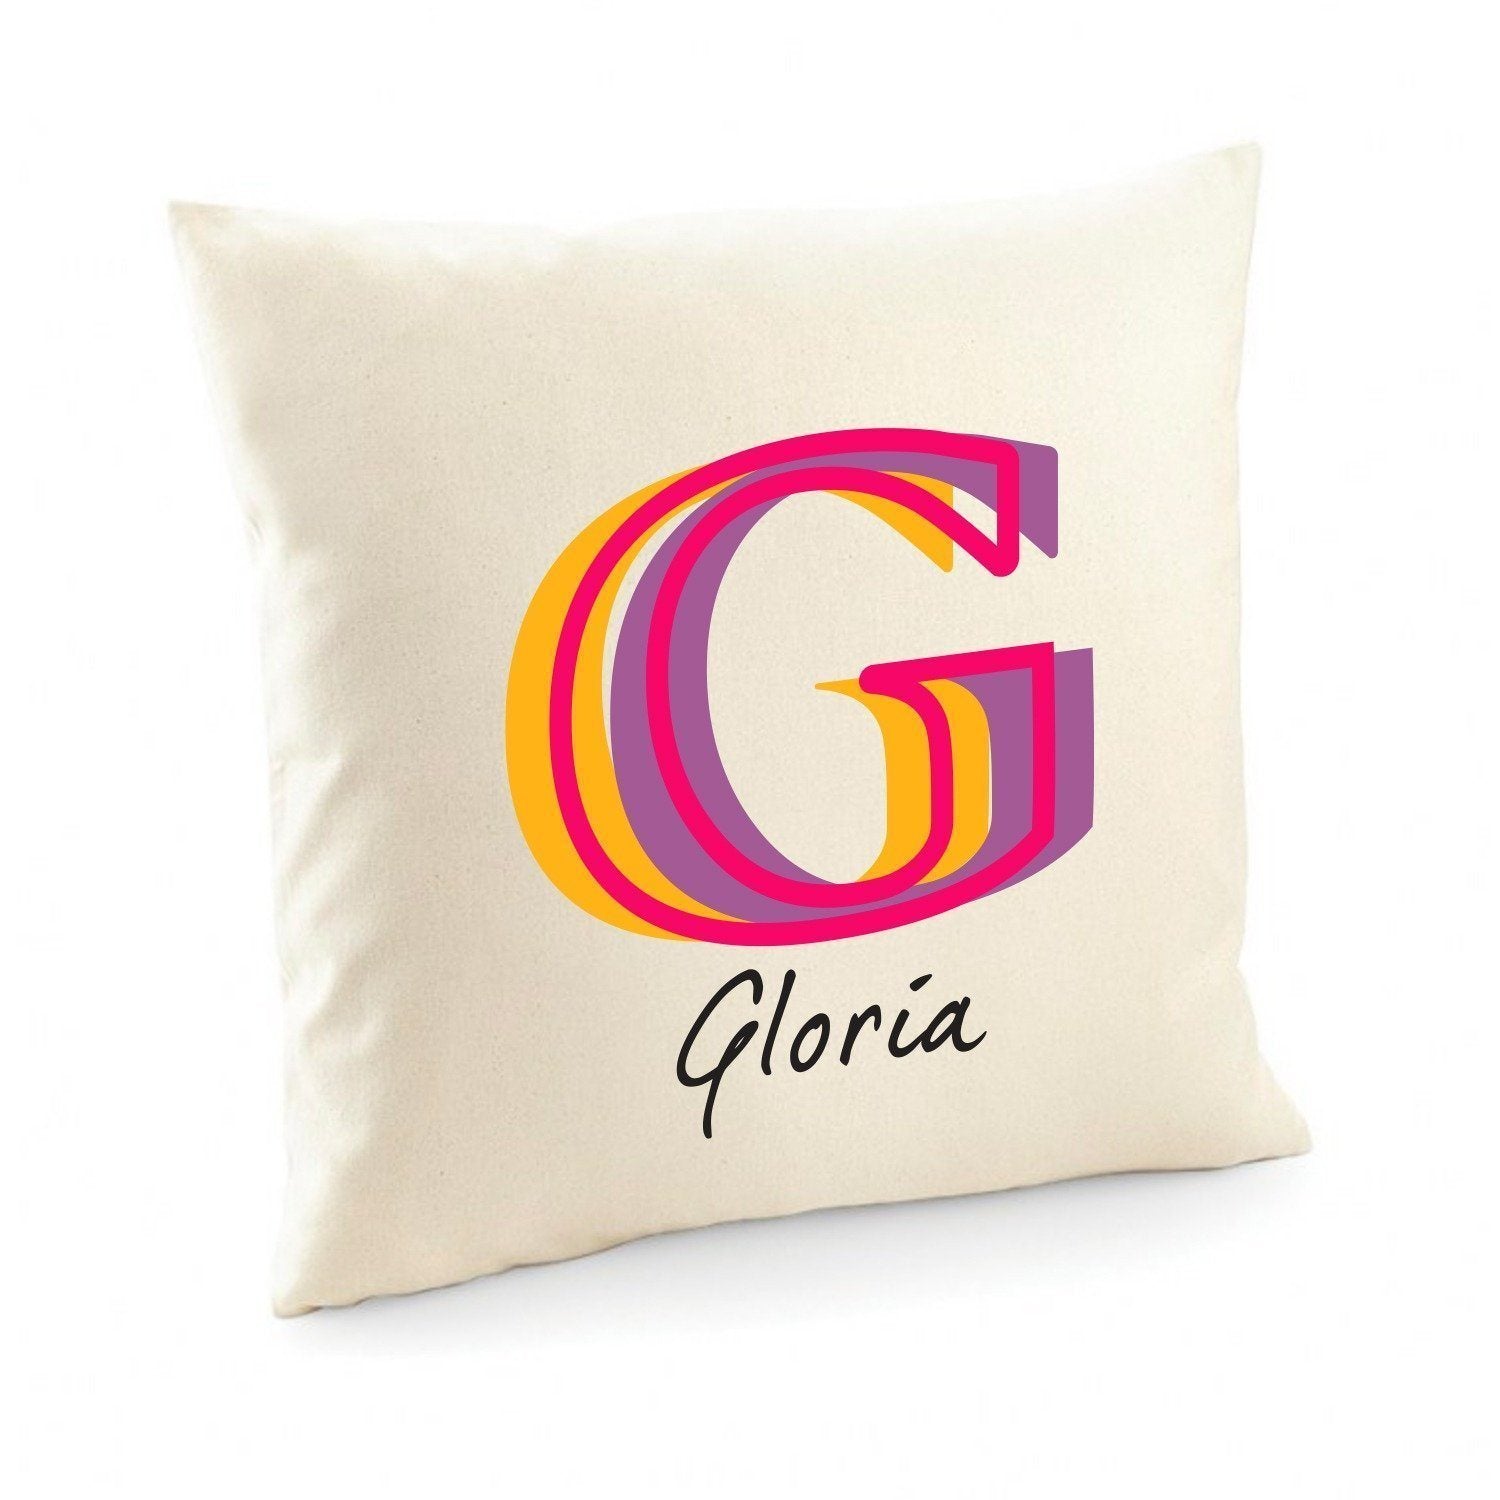 Stylish personalised name and initial cushion cover, Gift for him, living room decor